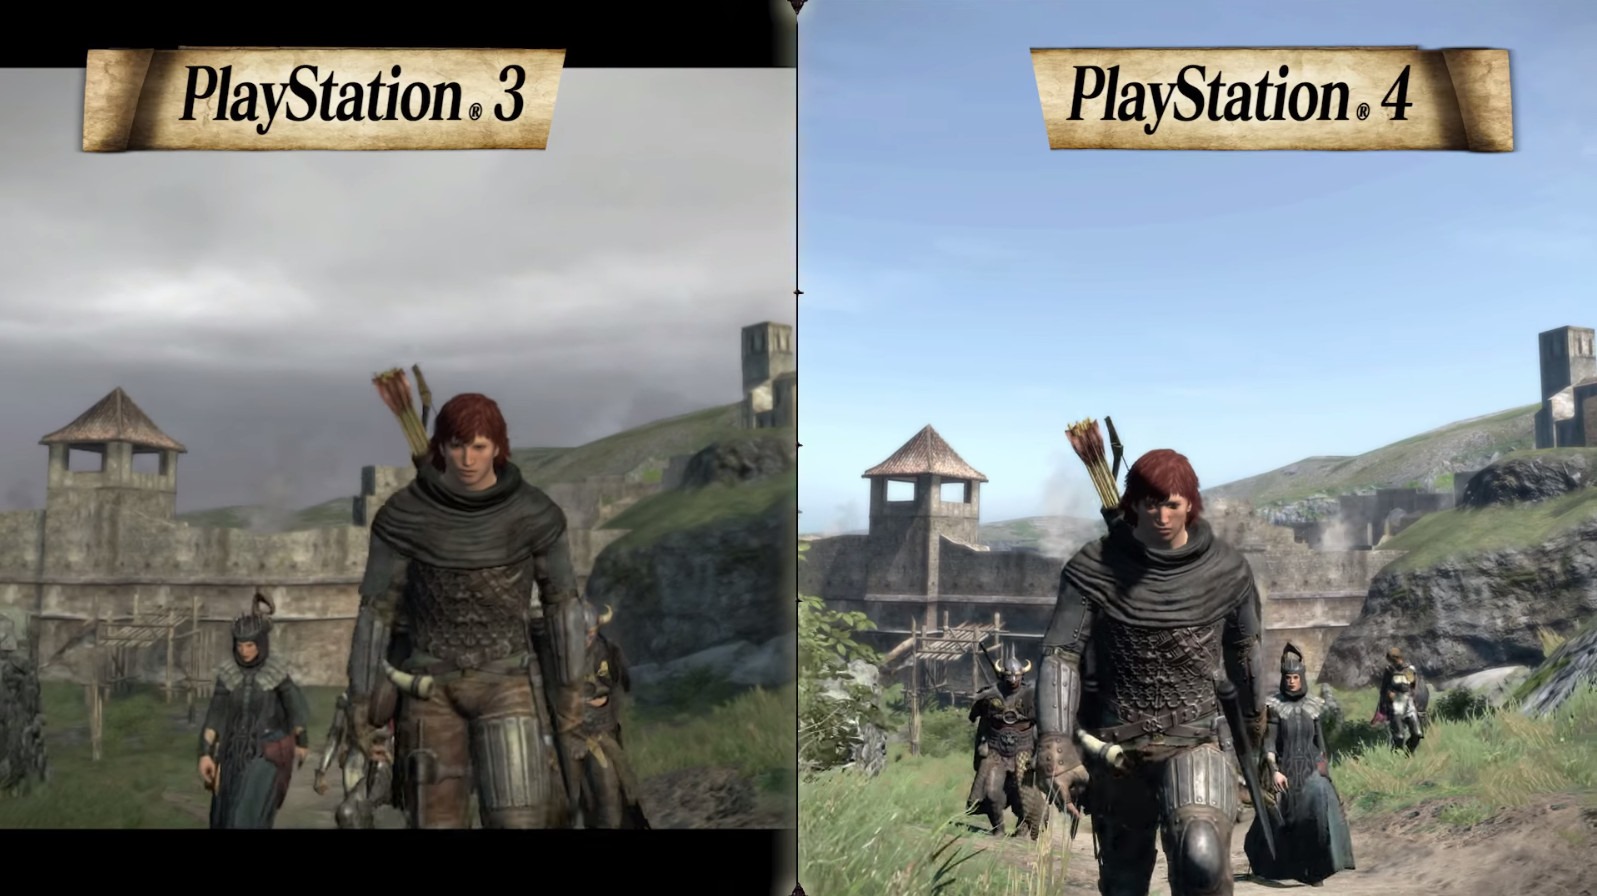 diff between ps3 and ps4